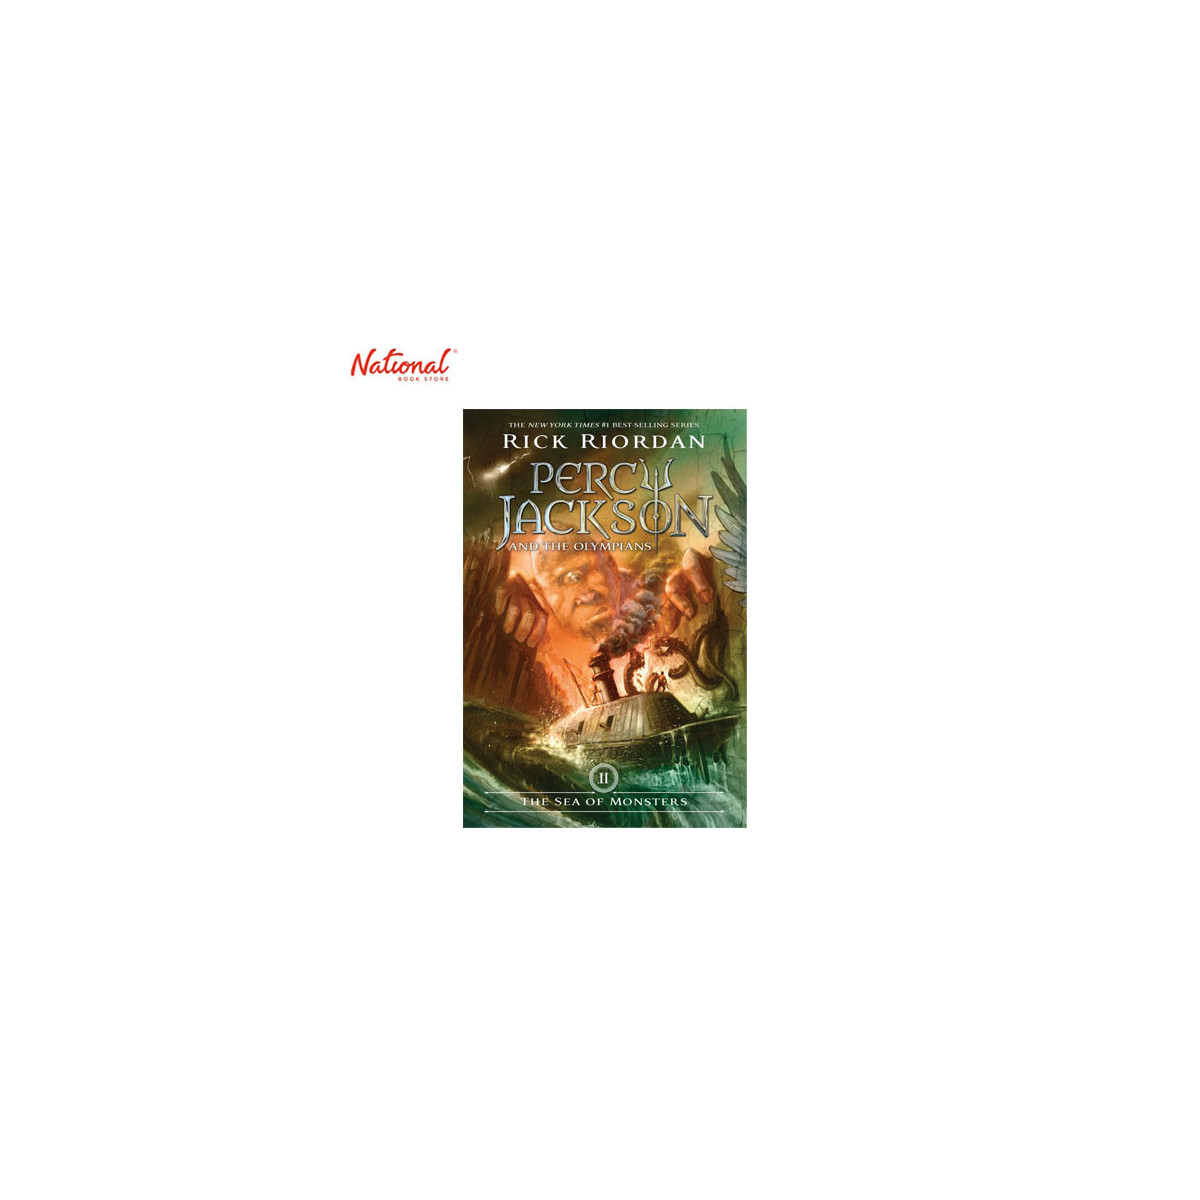 PERCY JACKSON AND THE OLYMPIANS SERIES 2: THE SEA OF MONSTERS